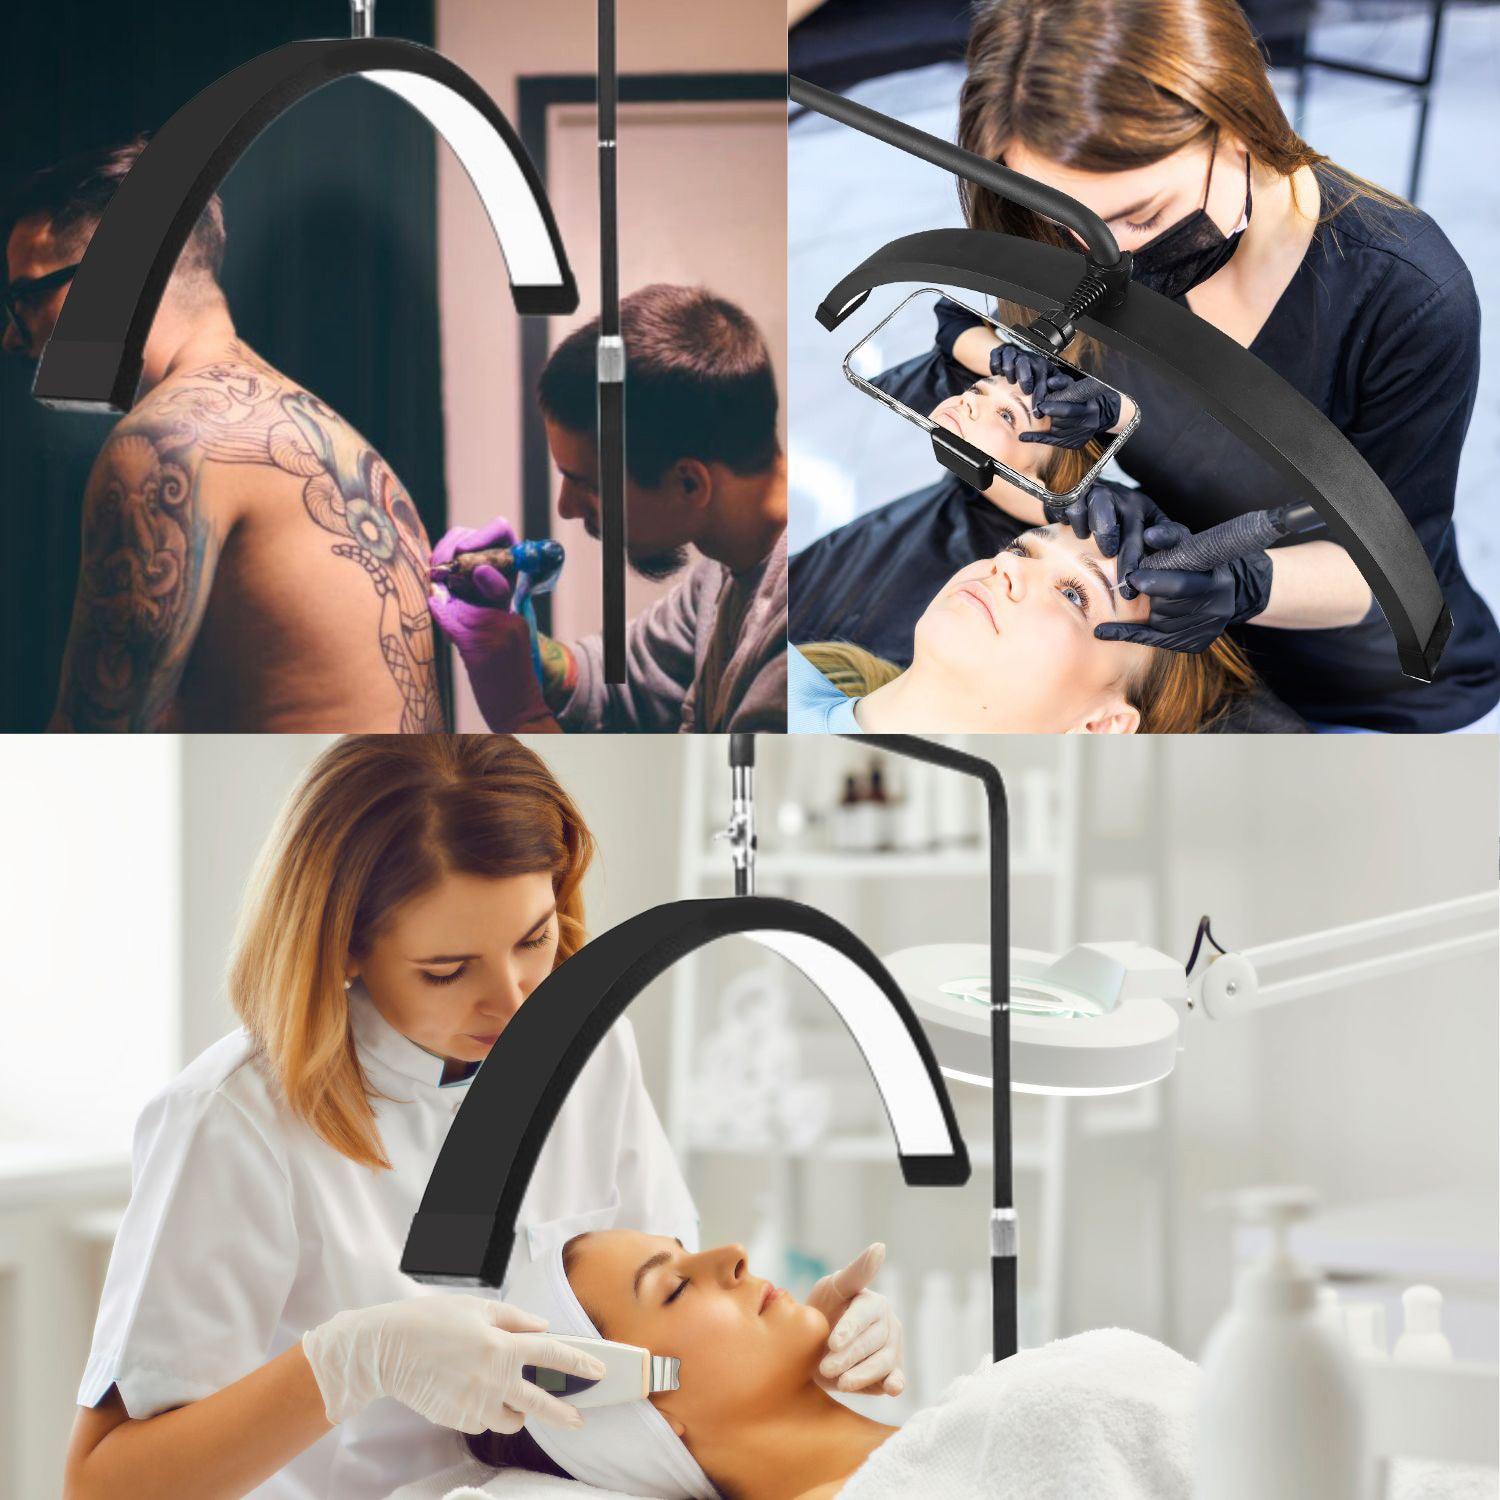 Half moon led light is also used by the  tattoo artist, eyebrow shaping woman and  beautician